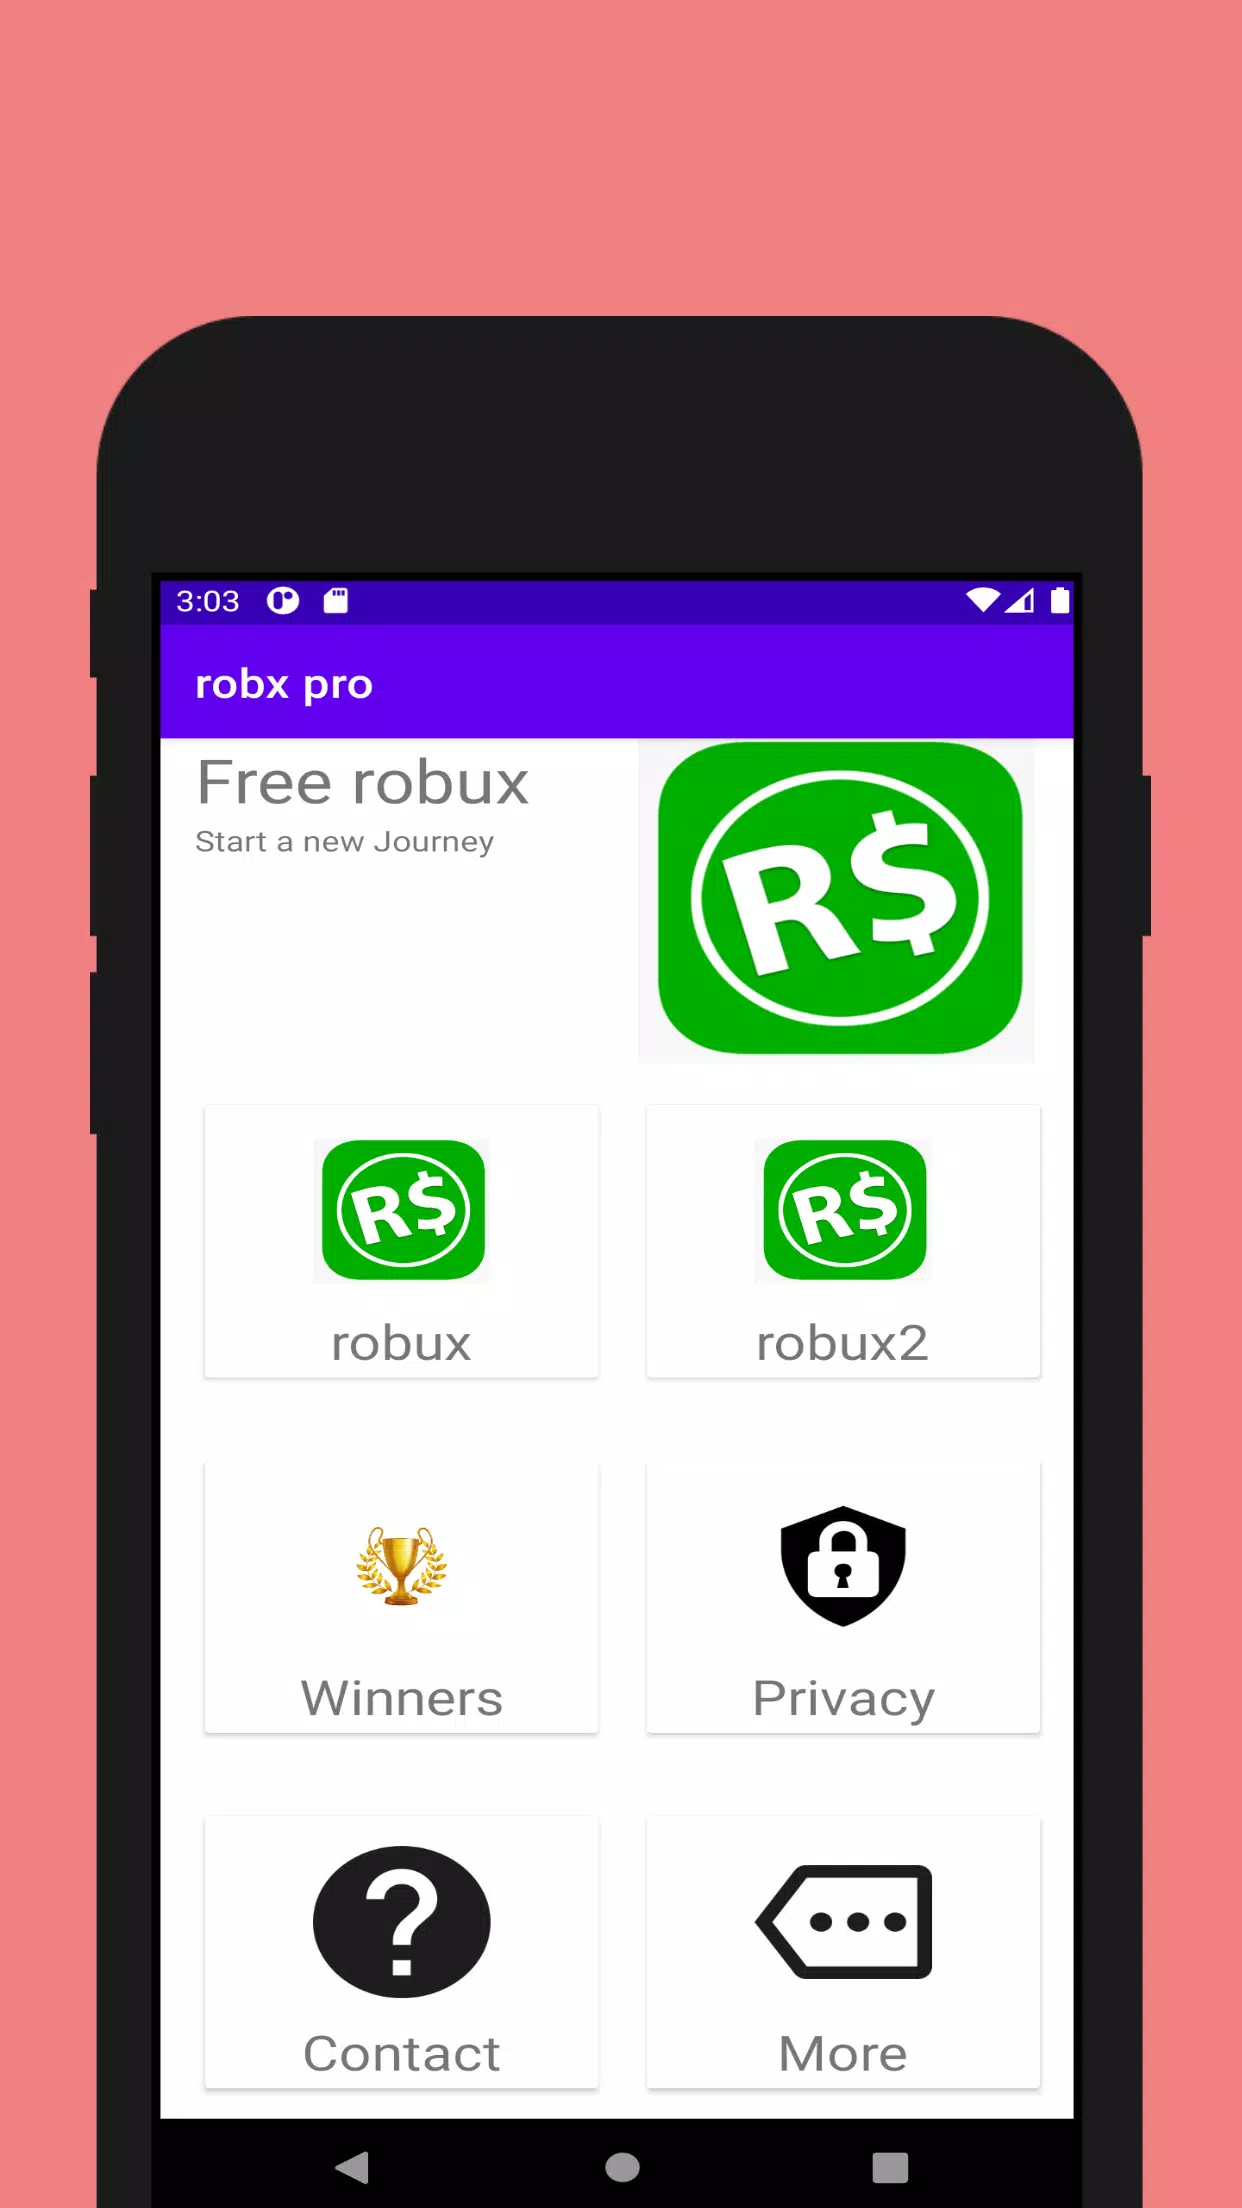 Free Robux Generator APK Download for Android - AndroidFreeware